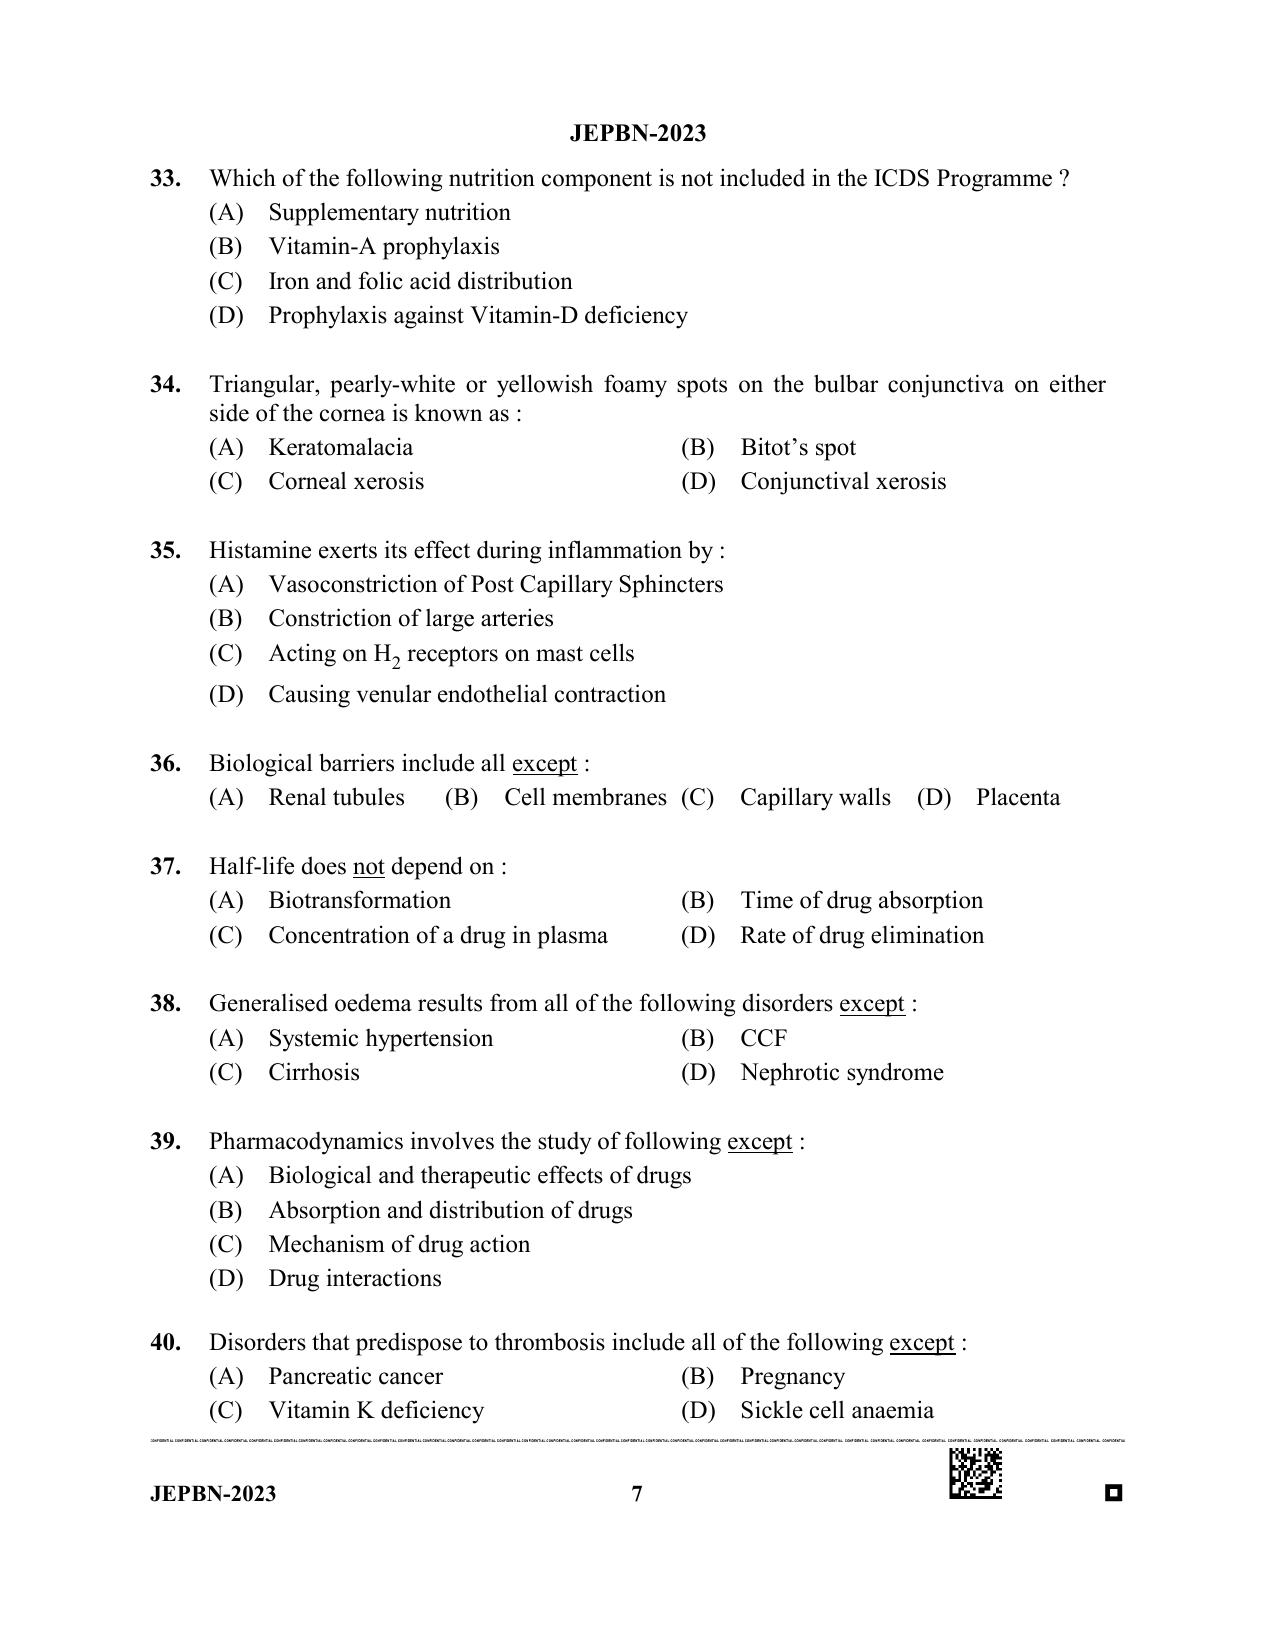 WBJEE JEPBN 2023 Question Paper - Page 7